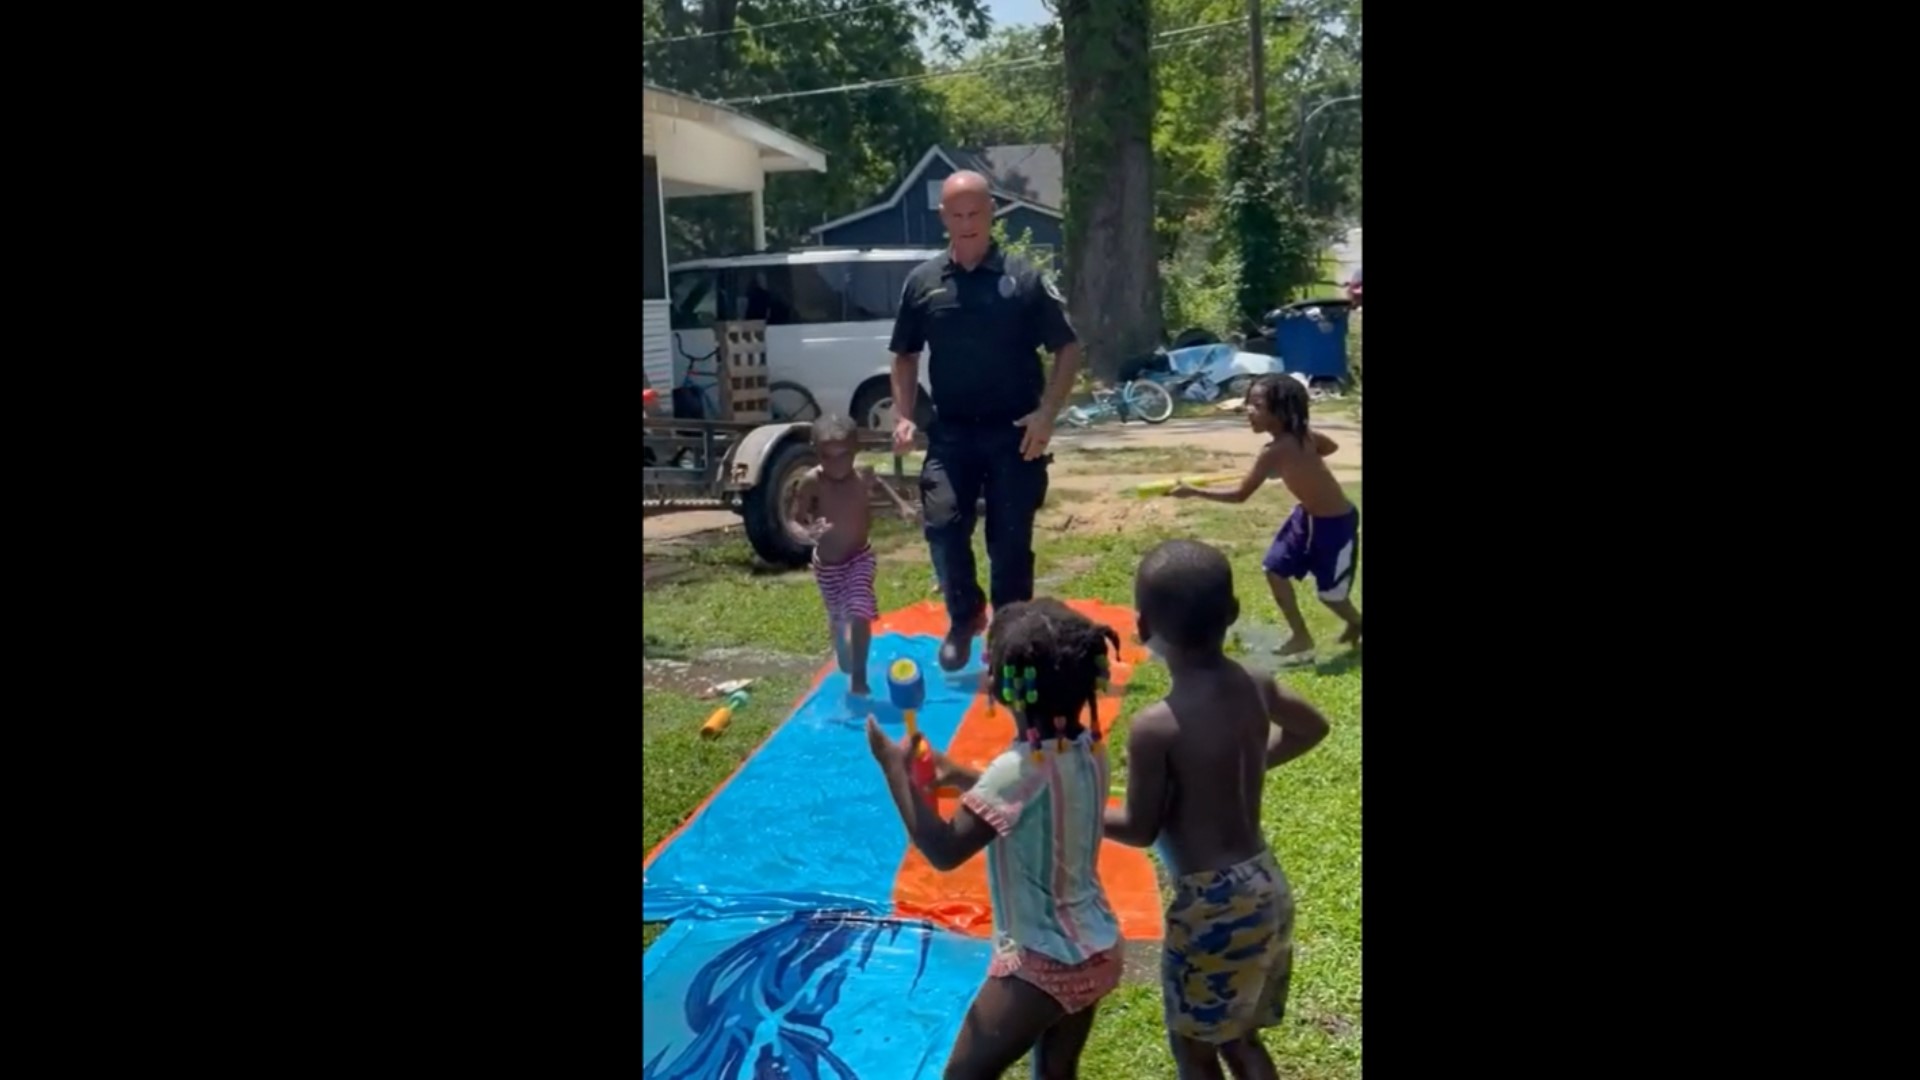 Officer Tommy Norman had fun with some kids in North Little Rock and helped them beat the summer heat with some slip-and-slide action!